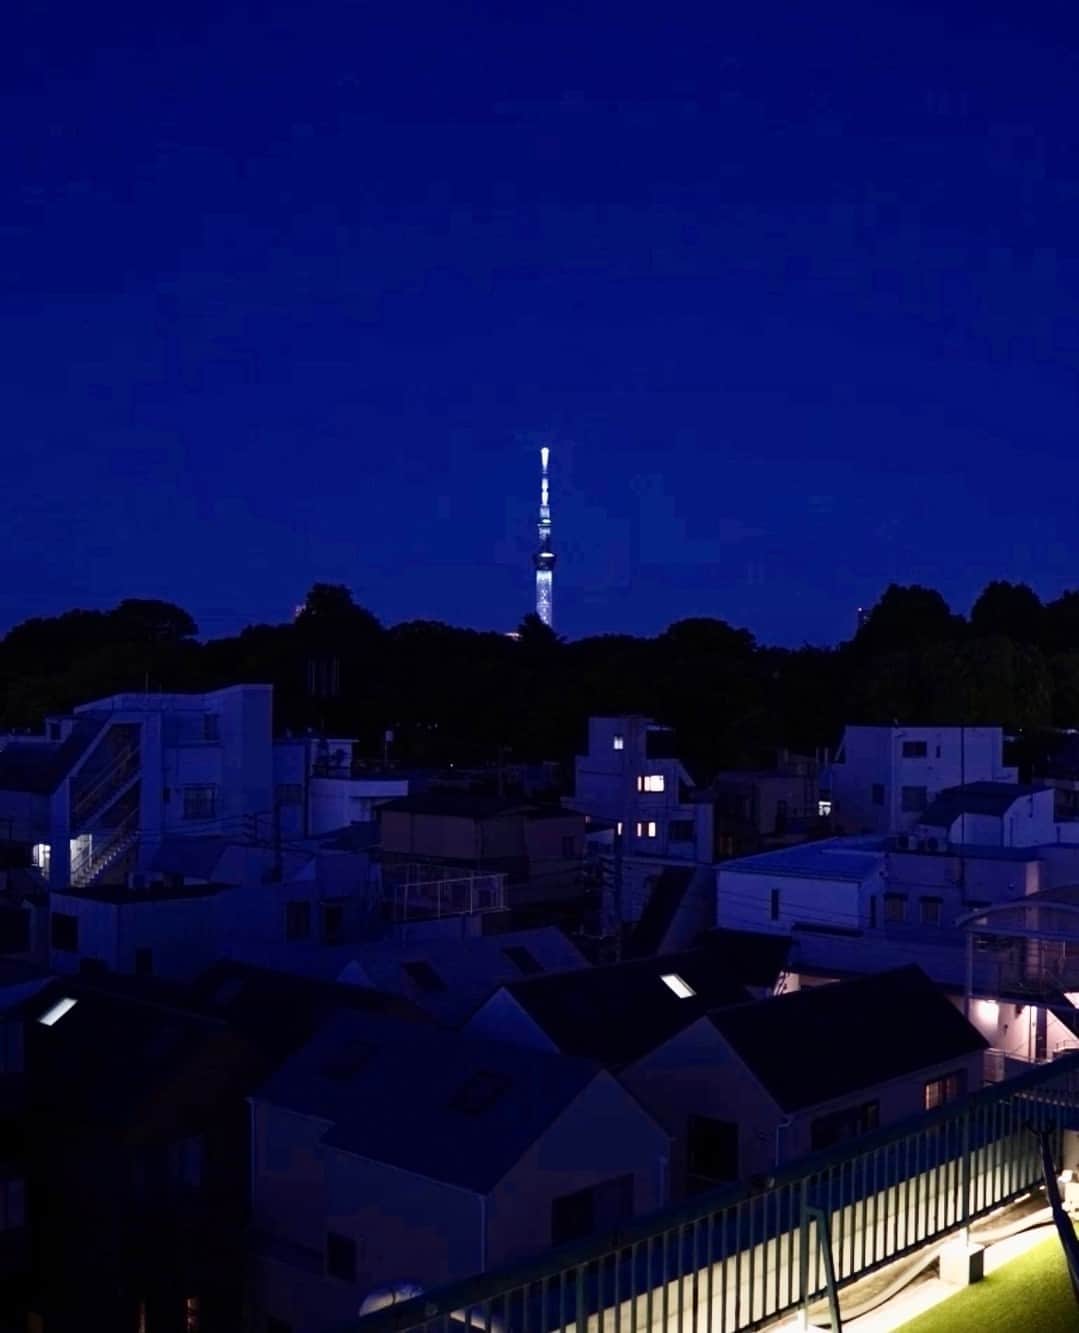 hotelgraphynezuのインスタグラム：「In the middle of the busiest city in the world but calm enough to enjoy a romantic view over the Skytree and a sky without skycrapers!⁠ ⁠ If you are looking for a bubble of peace without being too far away from the city center, HOTEL GRAPHY NEZU might be your favorite spot !⁠ ⁠  We are just a few blocks away from Ueno station !⁠ ⁠ ⁠----------⁠ ⁠ ⁠当ホテルは世界で最も忙しい都市の真ん中にありながら、高層ビルのない空とスカイツリー、ロマンチックな景色を楽しむのに十分な静けさです。⁠ ⁠ 都心からあまり離れずに静かな空間をお探しなら、ホテル グラフィー ネズがおすすめです。⁠ ⁠ ホテルグラフィー根津は、上野駅から徒歩15分にあります。⁠ ⁠ ⁠ ⁠ Official Website ⇒ https://www.livelyhotels.com/ja/hotelgraphy/ ⁠ ⁠ ⁠ 📍HOTEL GRAPHY NEZU⁠ 110-0008 Tokyo-to Taito-ku Ikenohata 4-5-10 ⁠ .⁠ .⁠ .⁠ .⁠ ⁠ ⁠ ⁠ #explorelively #lifestylehotel #hotelgraphynezu ⁠ ⁠ #summersky #rooftop #hotelrooftop⁠ #romanticview⁠ #tokyohotel #tokyohostel #hostellife #uenotokyo #tokyolife #tokyotokyo #東京ホテル #東京ホステル #東京 #ホテル #ライフスタイルホテル #ルーフトップ #ホテルルーフトップ #屋上 #夏空 #東京観光 #上野 #根津 #谷中 #下町 #ロマンティックビュー」